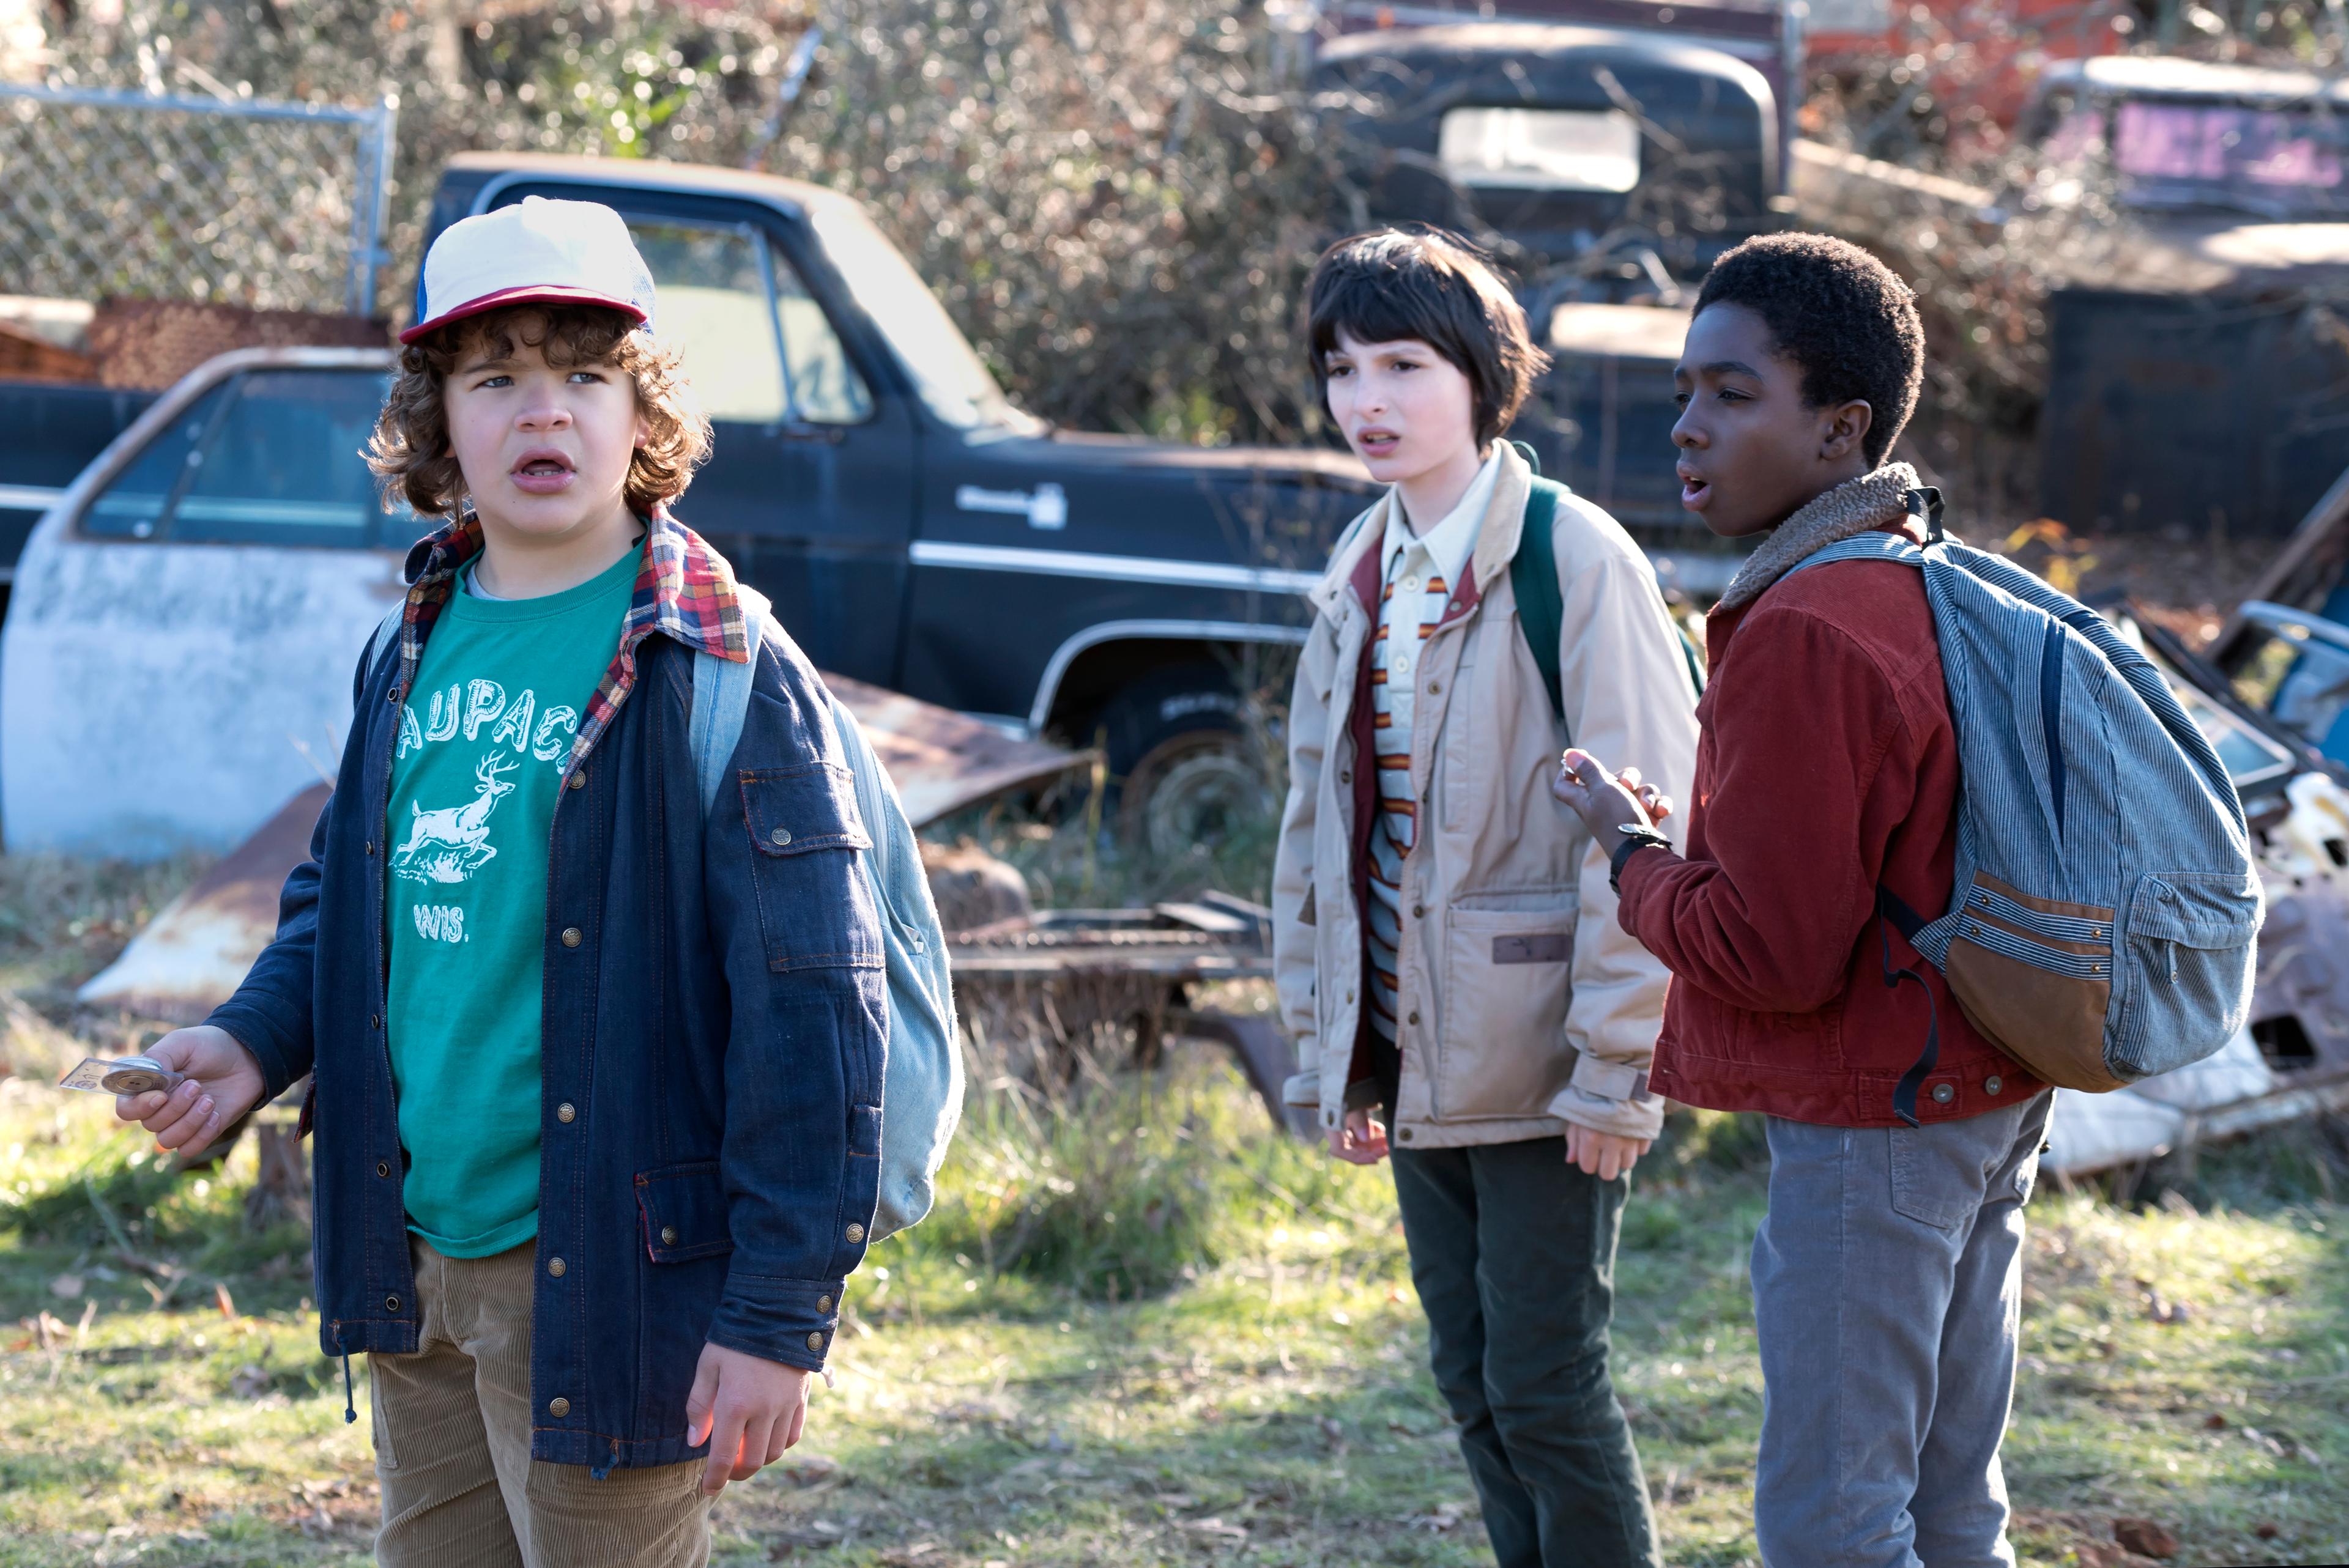 Dustin, Mike, Lucas, and Caleb stand in a field in Stranger Things Season 1.